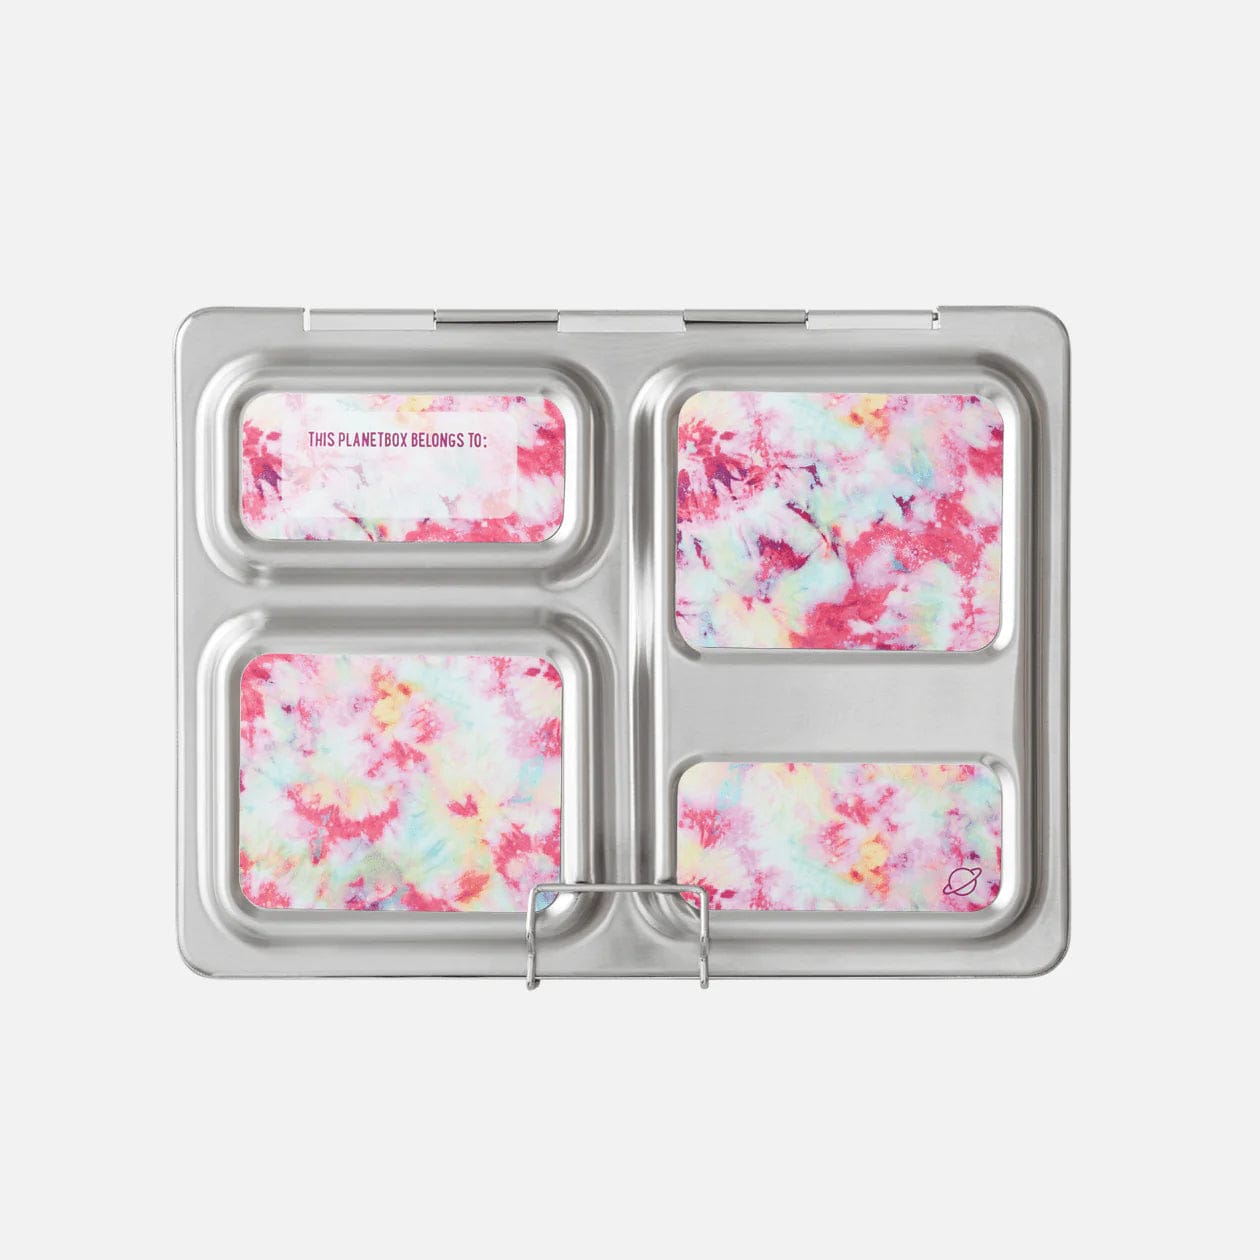 Planetbox LAUNCH Lunch Box Kits (Box, Carry Bag, Containers, Magnets) Unicorn Magic / Blossom Tie Dye